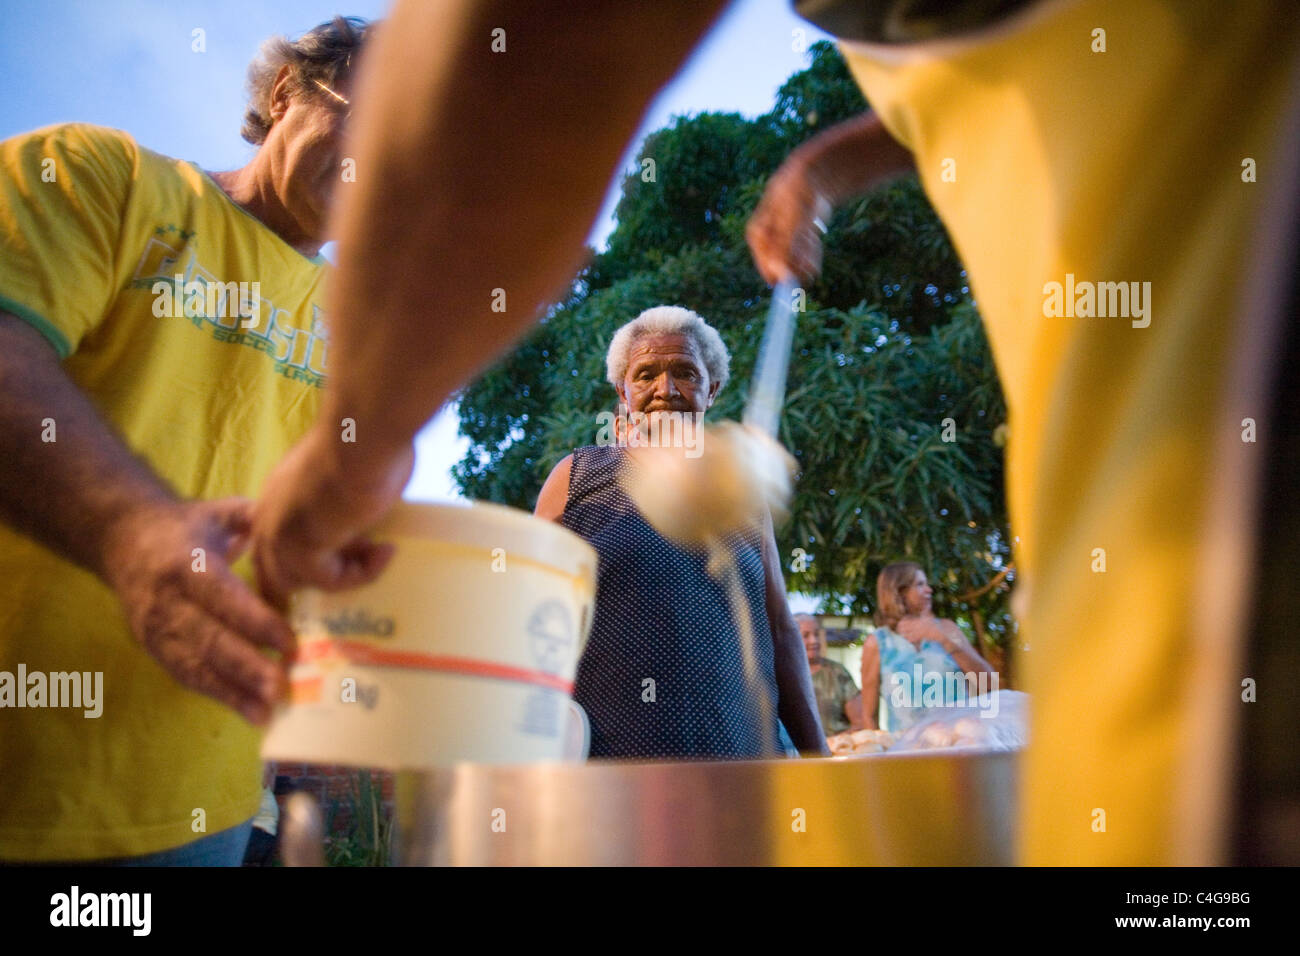 Distribution of soap and bread to poor people Making a better world, making a difference against poverty Stock Photo